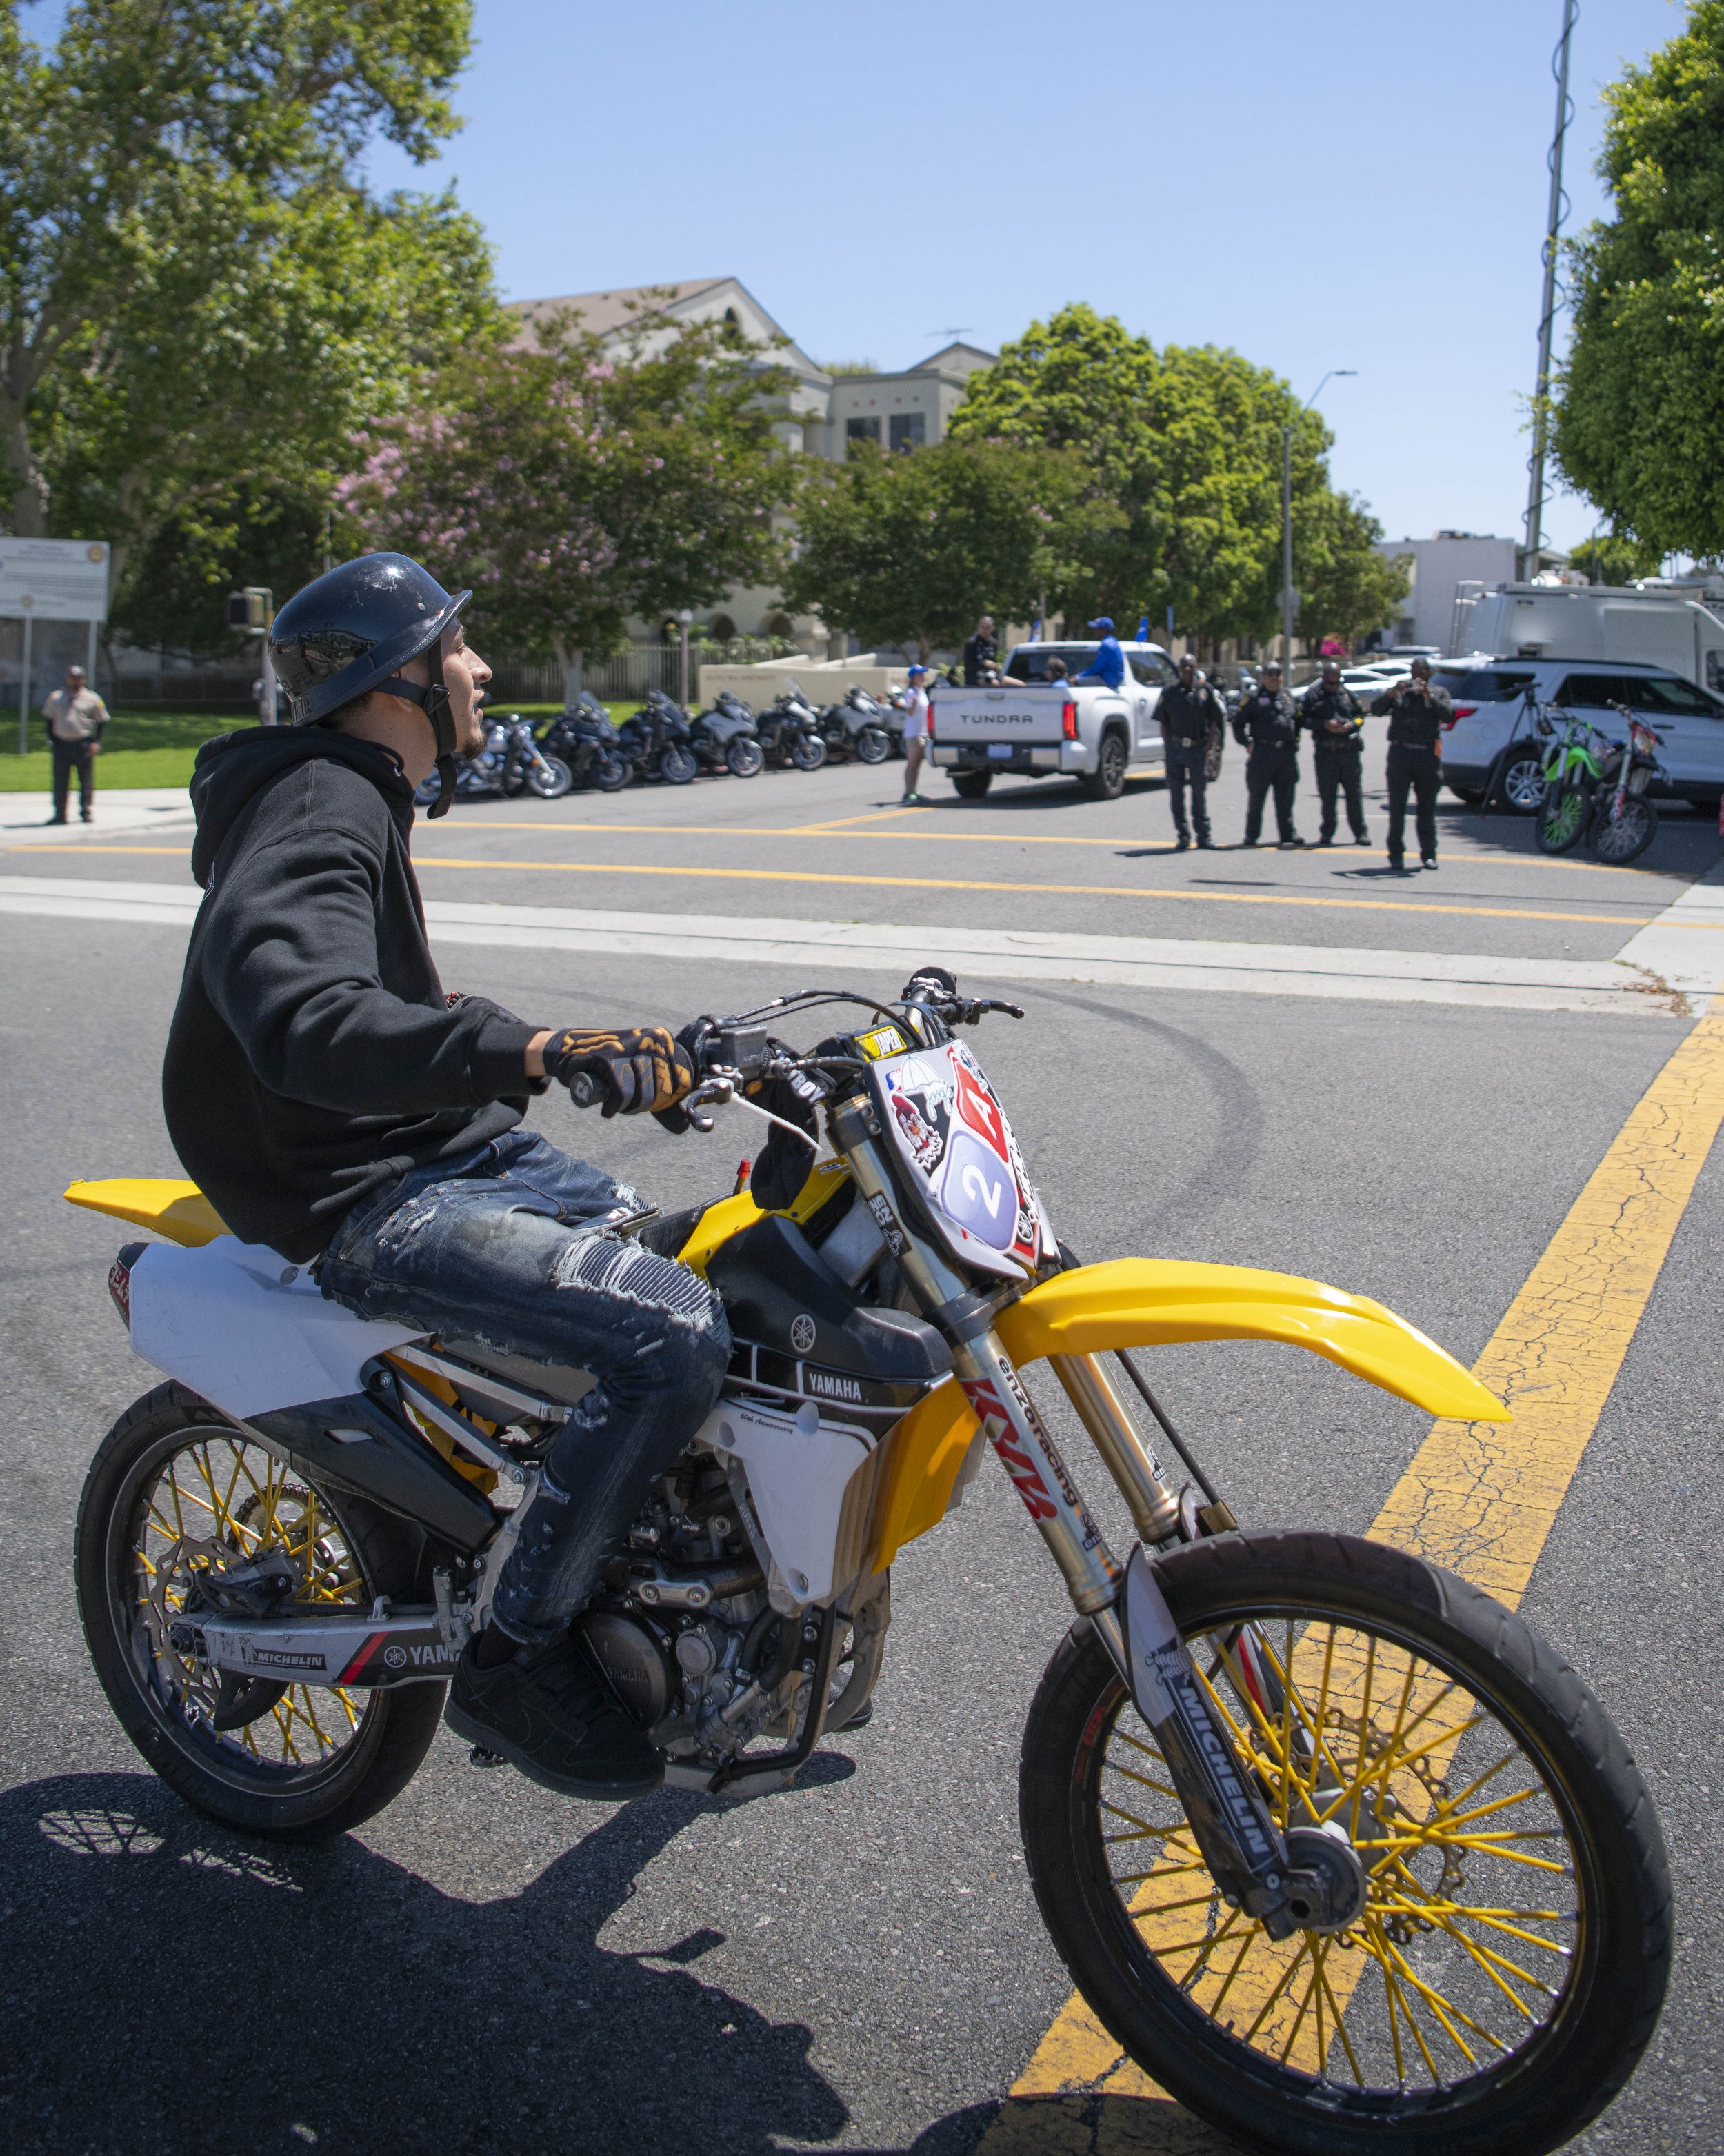  A mototocycle rider participating in the Juneteenth parade rides by as police watch and even snap some photos.  (Jon Putman | The Corsair) 